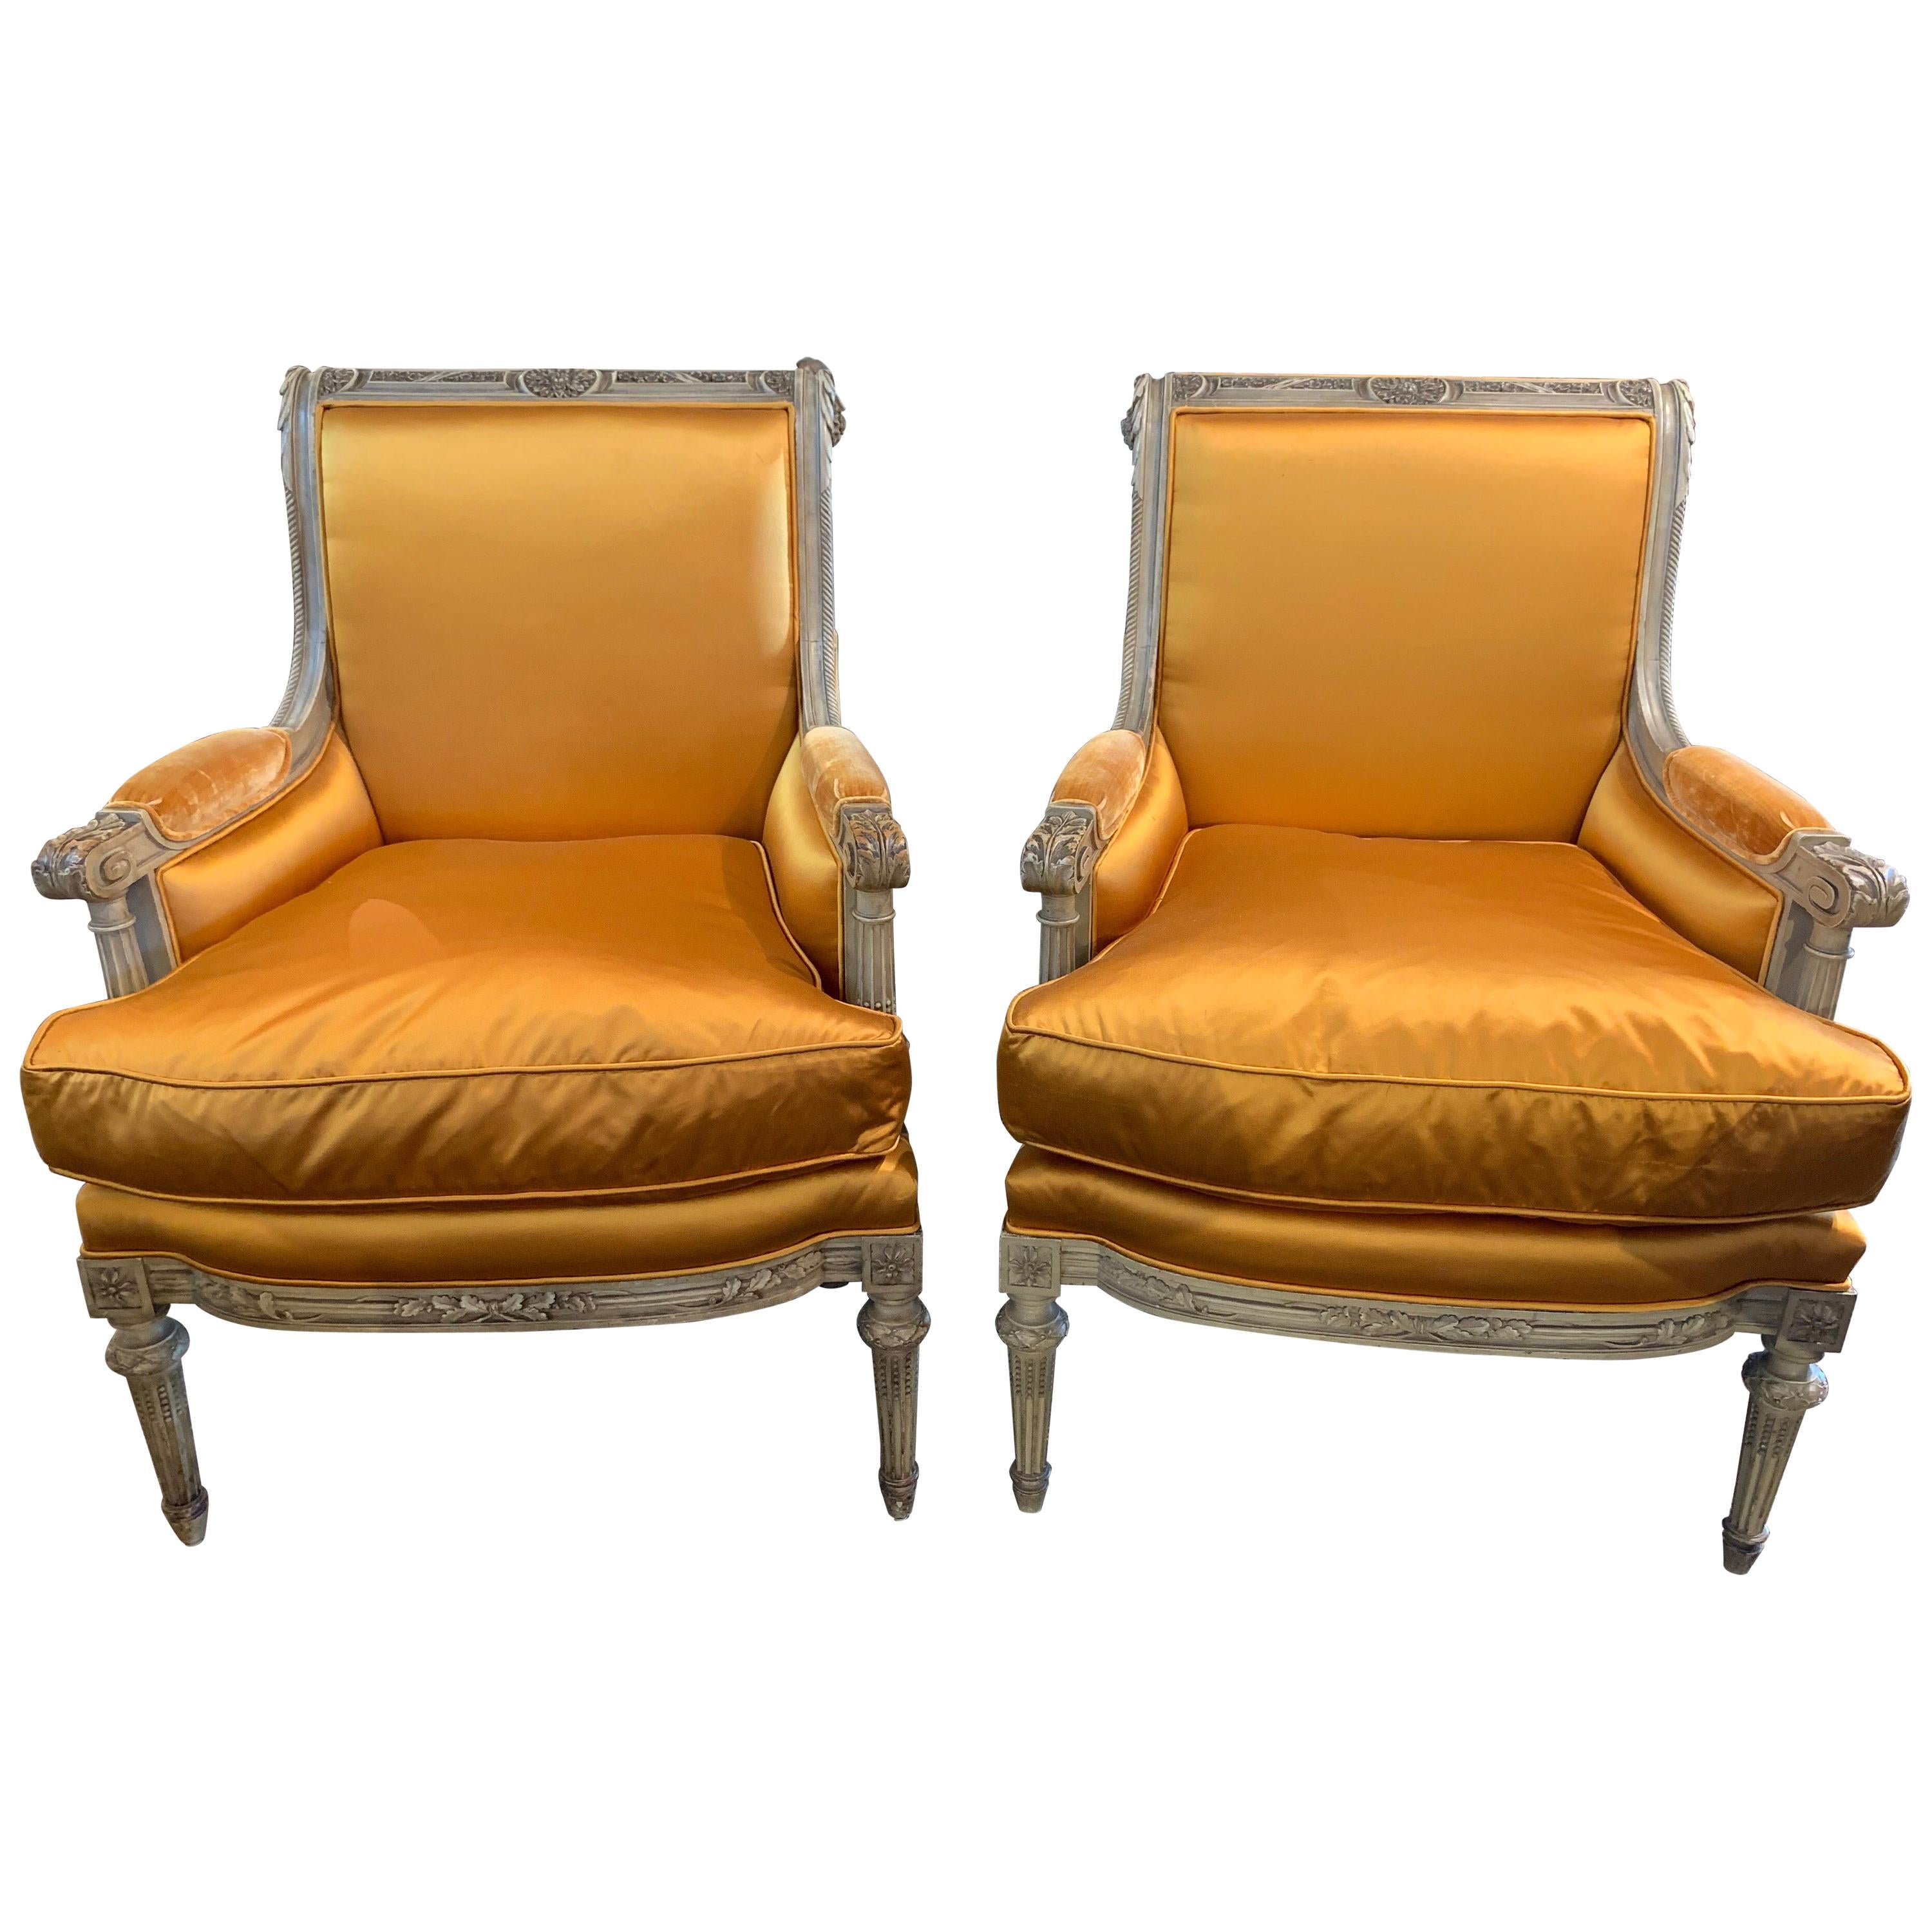 Pair of 19th Century French Louis XVI Carved Armchairs with Silk Upholstery